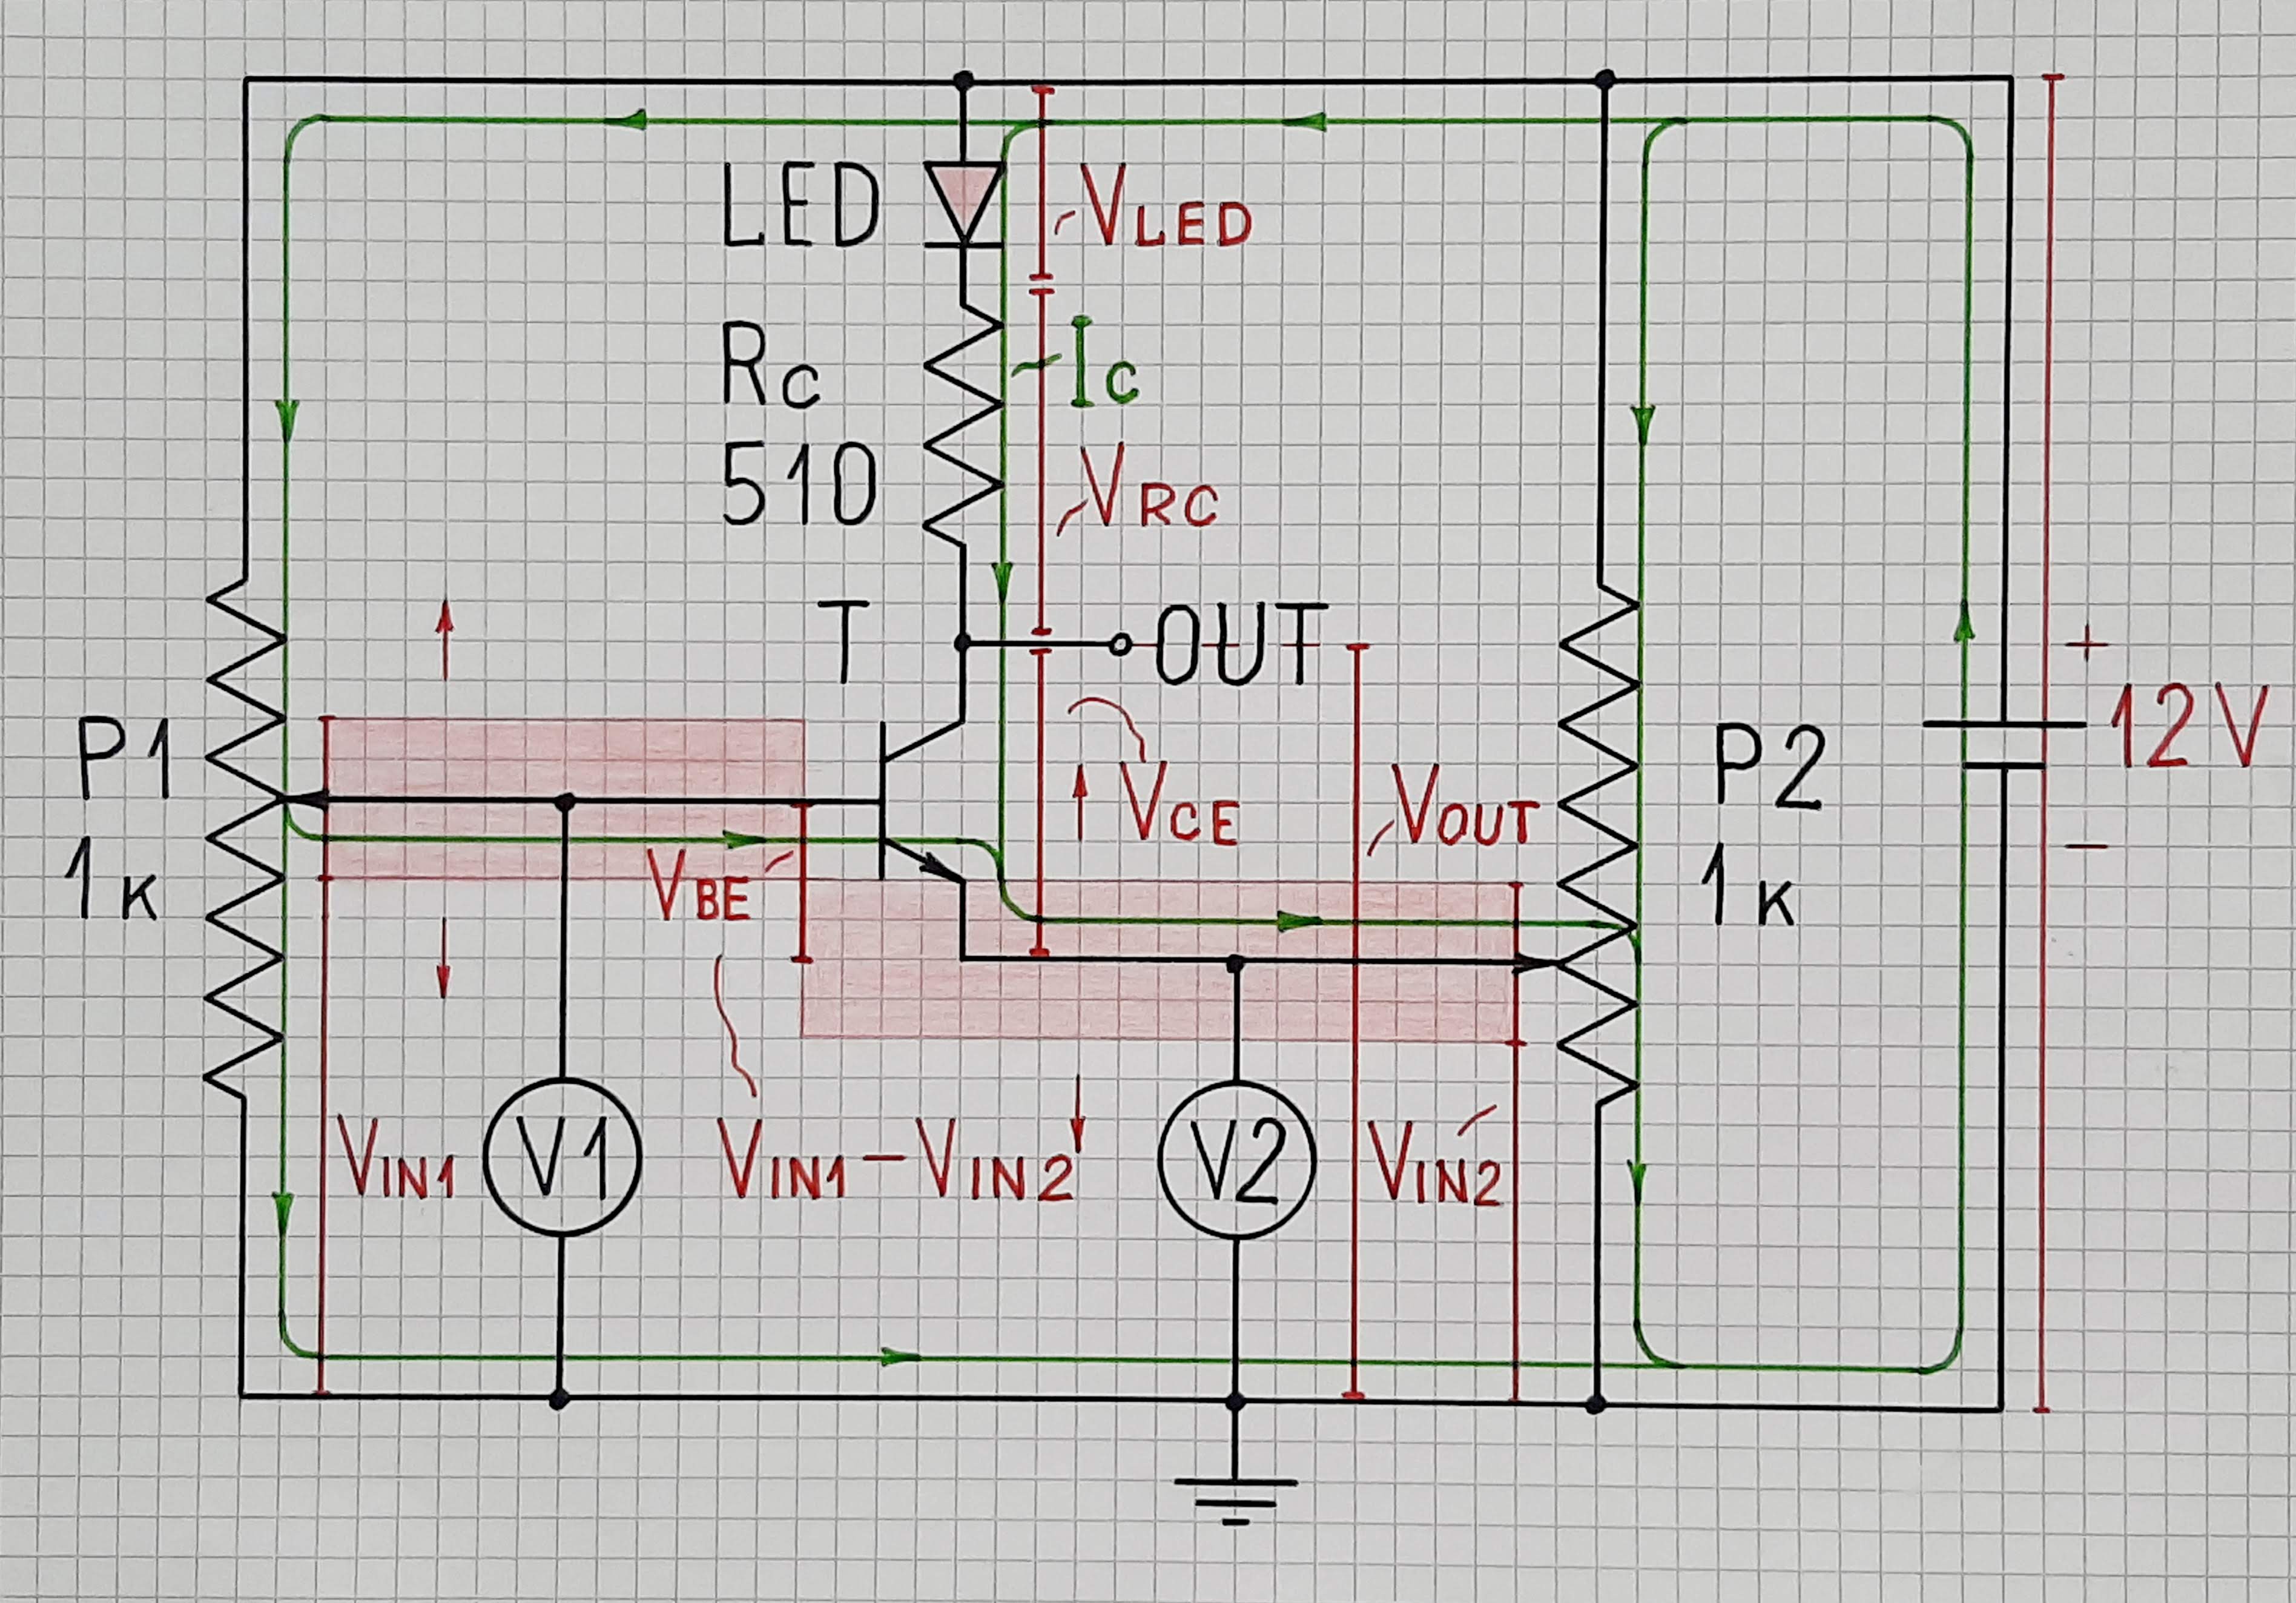 Investigating a transistor stage by applying both base and emitter inpout voltages (common mode)